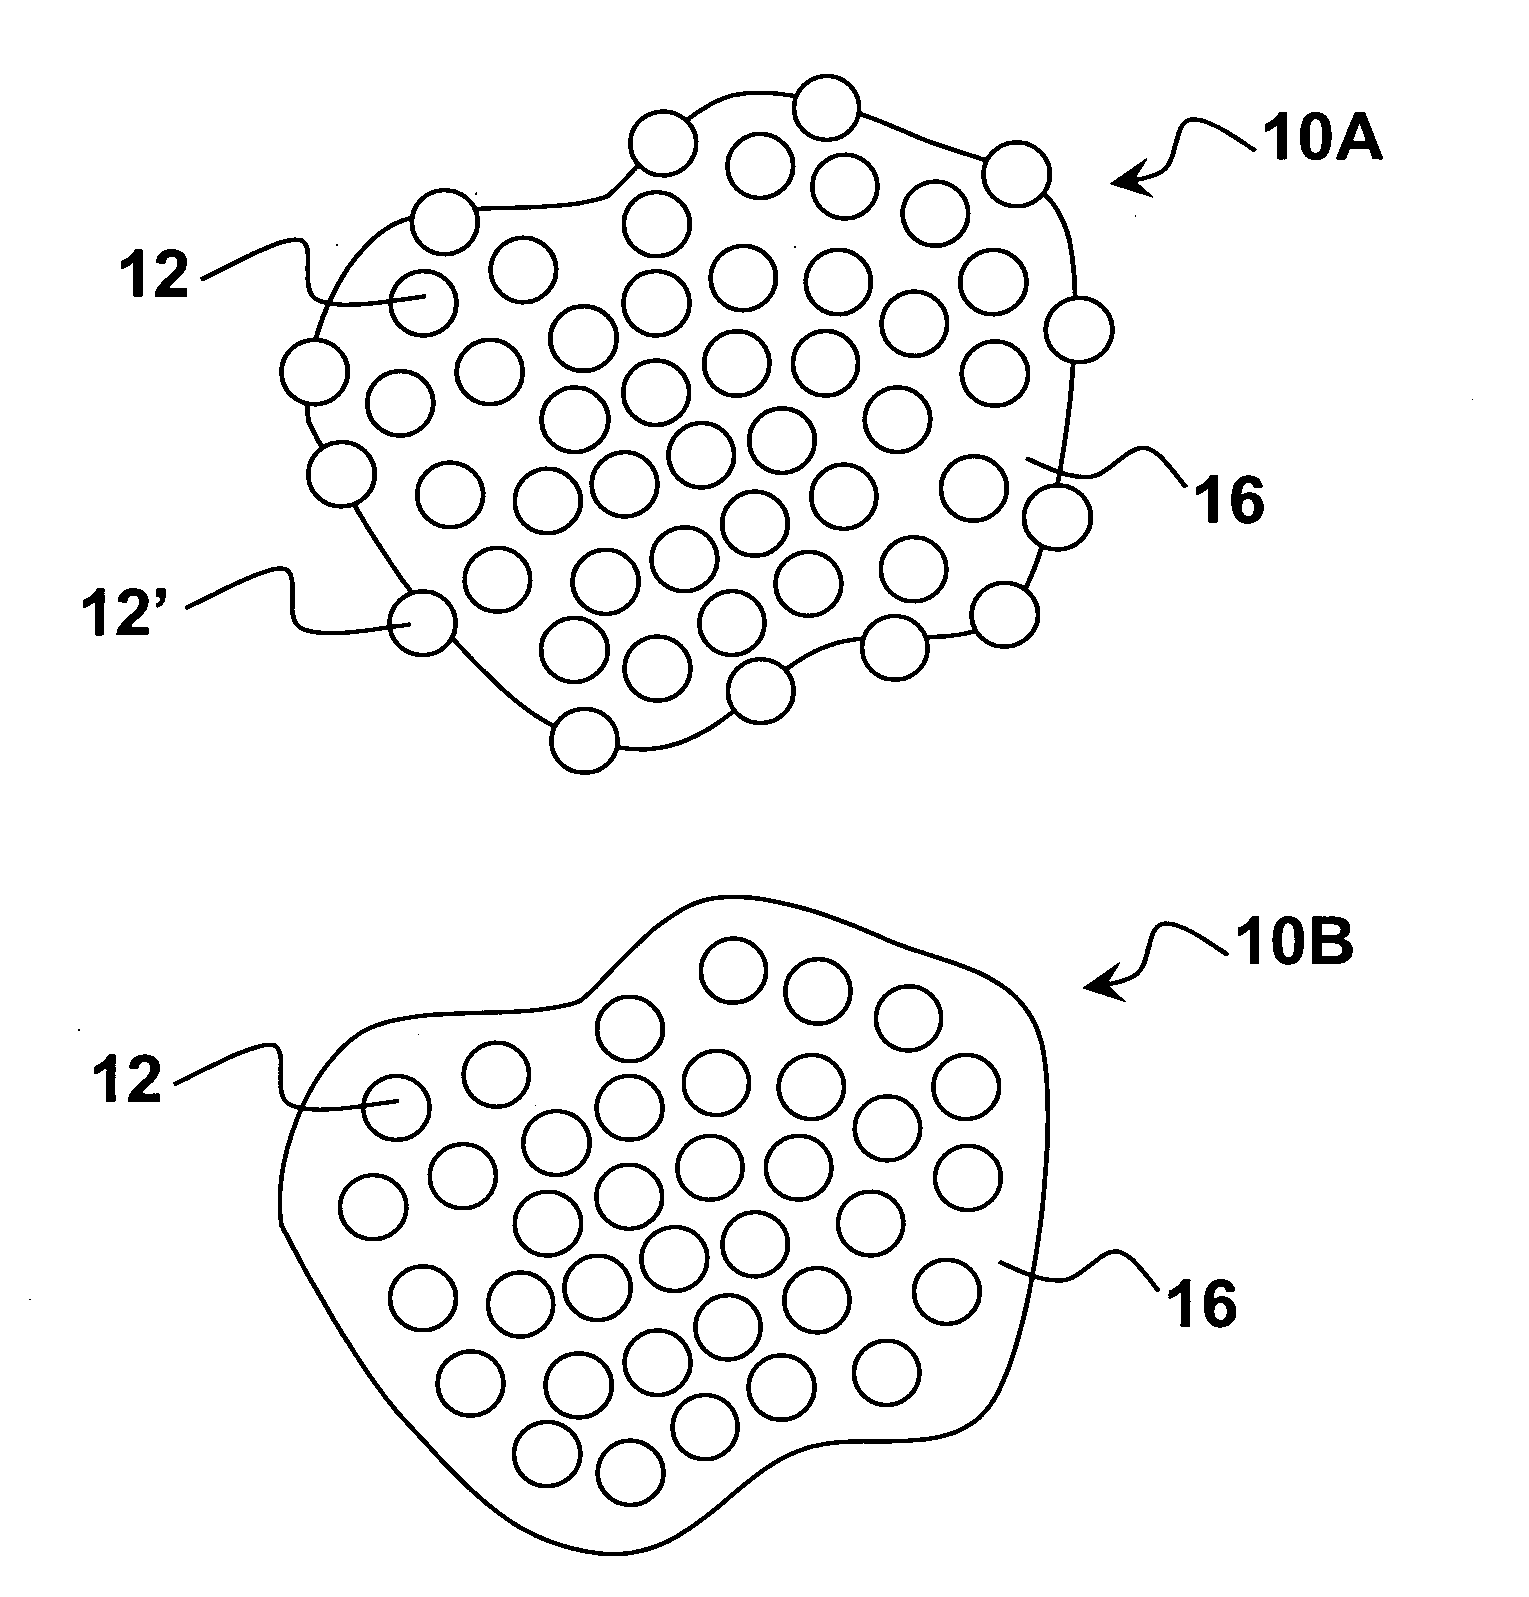 Pharmaceutical compositions comprising nanoparticles comprising enteric polymers casein